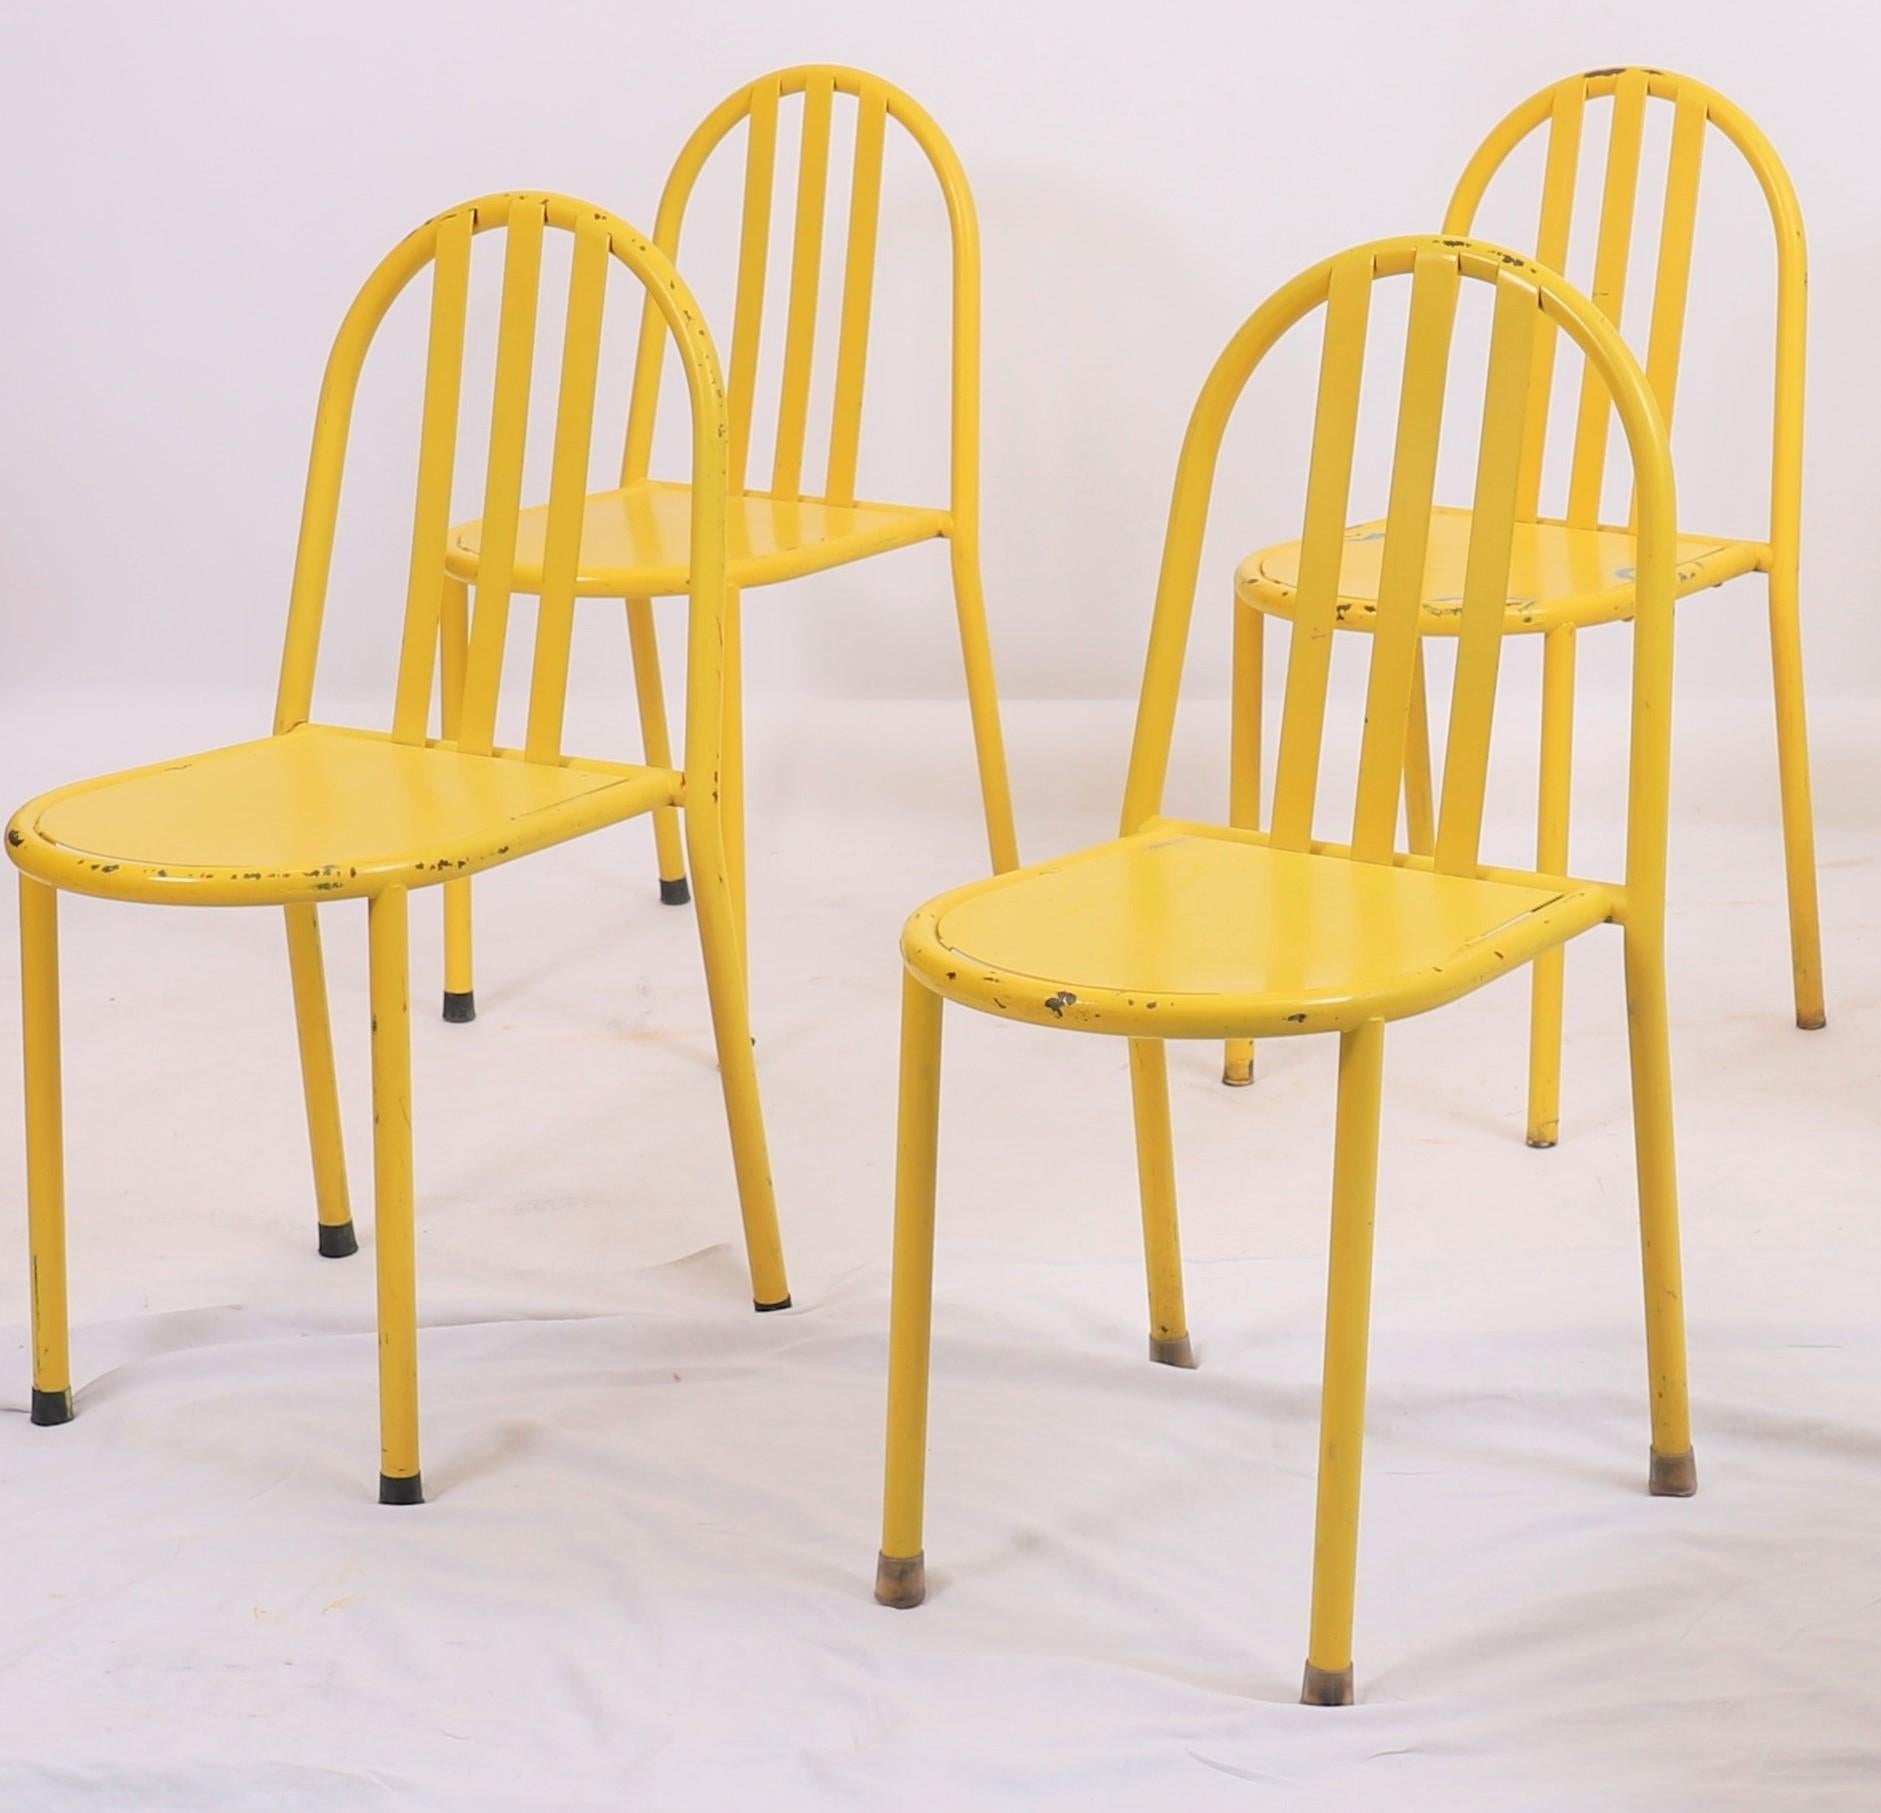 Suite of Six Modernist Tubular Chairs by Robert Mallet-Stevens In Good Condition For Sale In Mondorf les Bains, LU